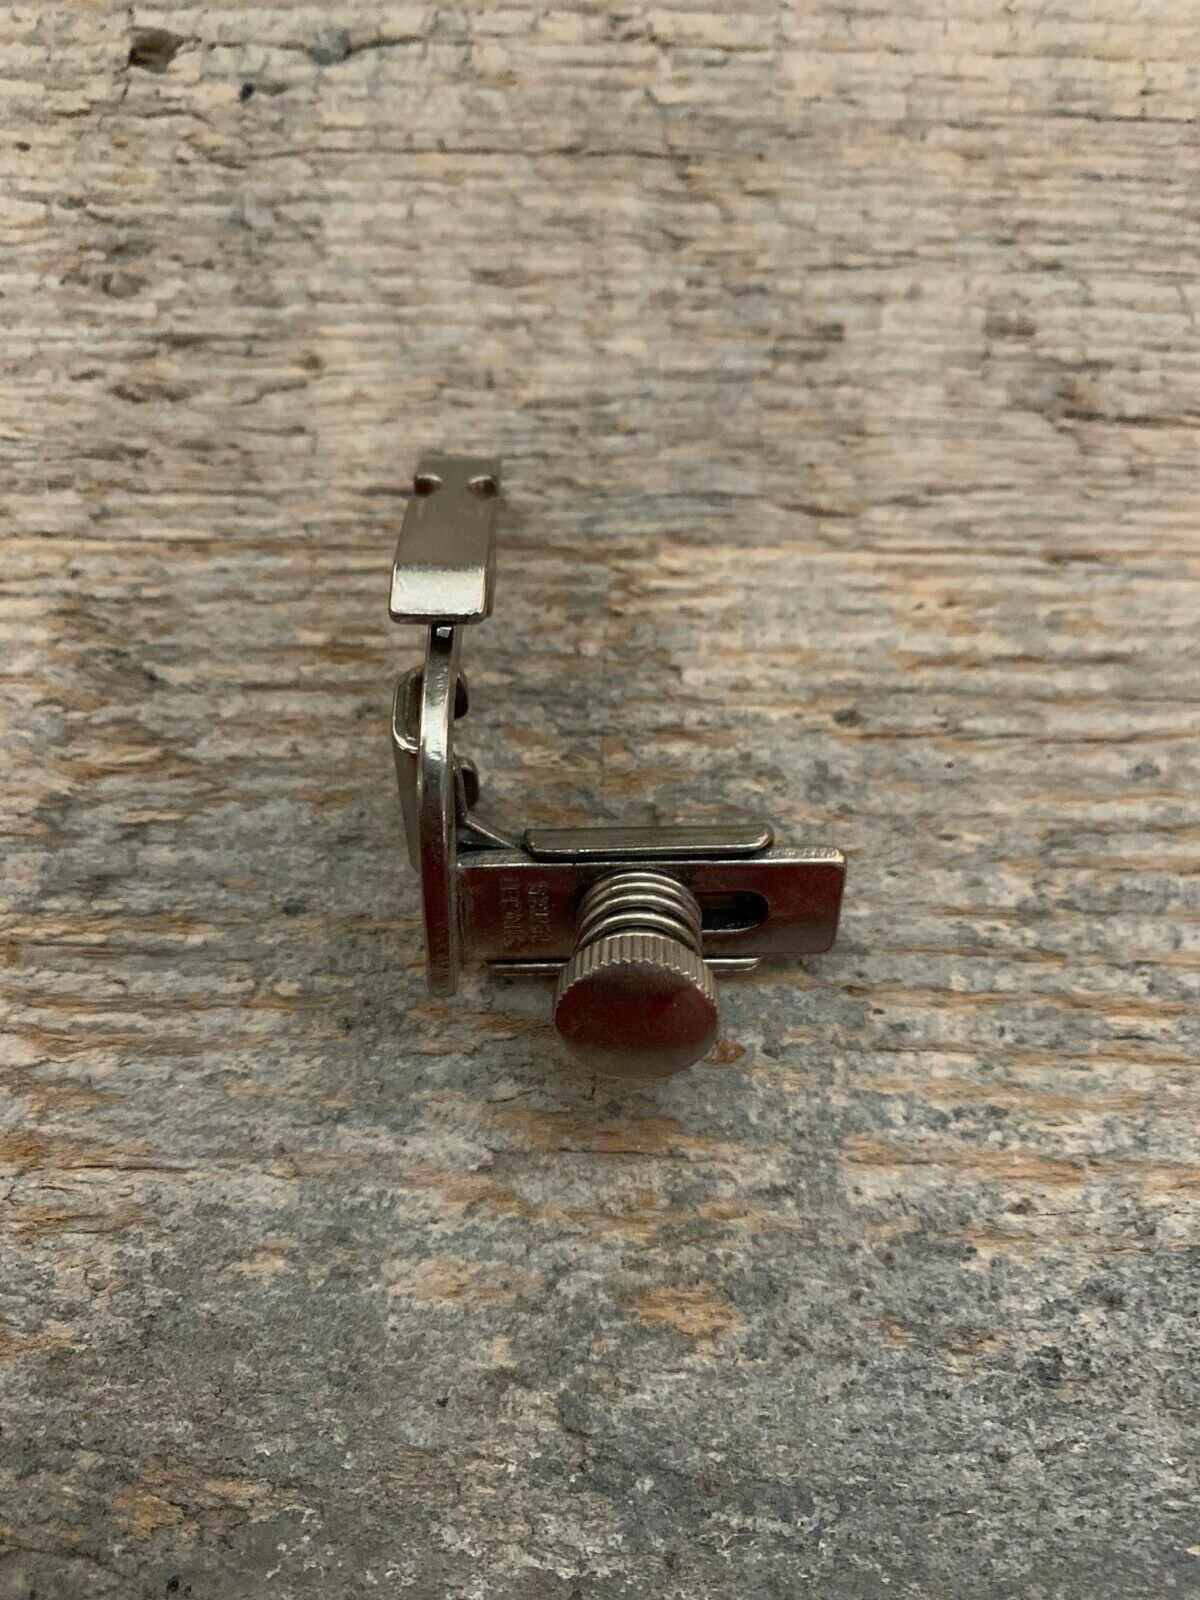 SINGER SEWING MACHINE PART 161125 LOW SHANK made in Great Britain - $8.28